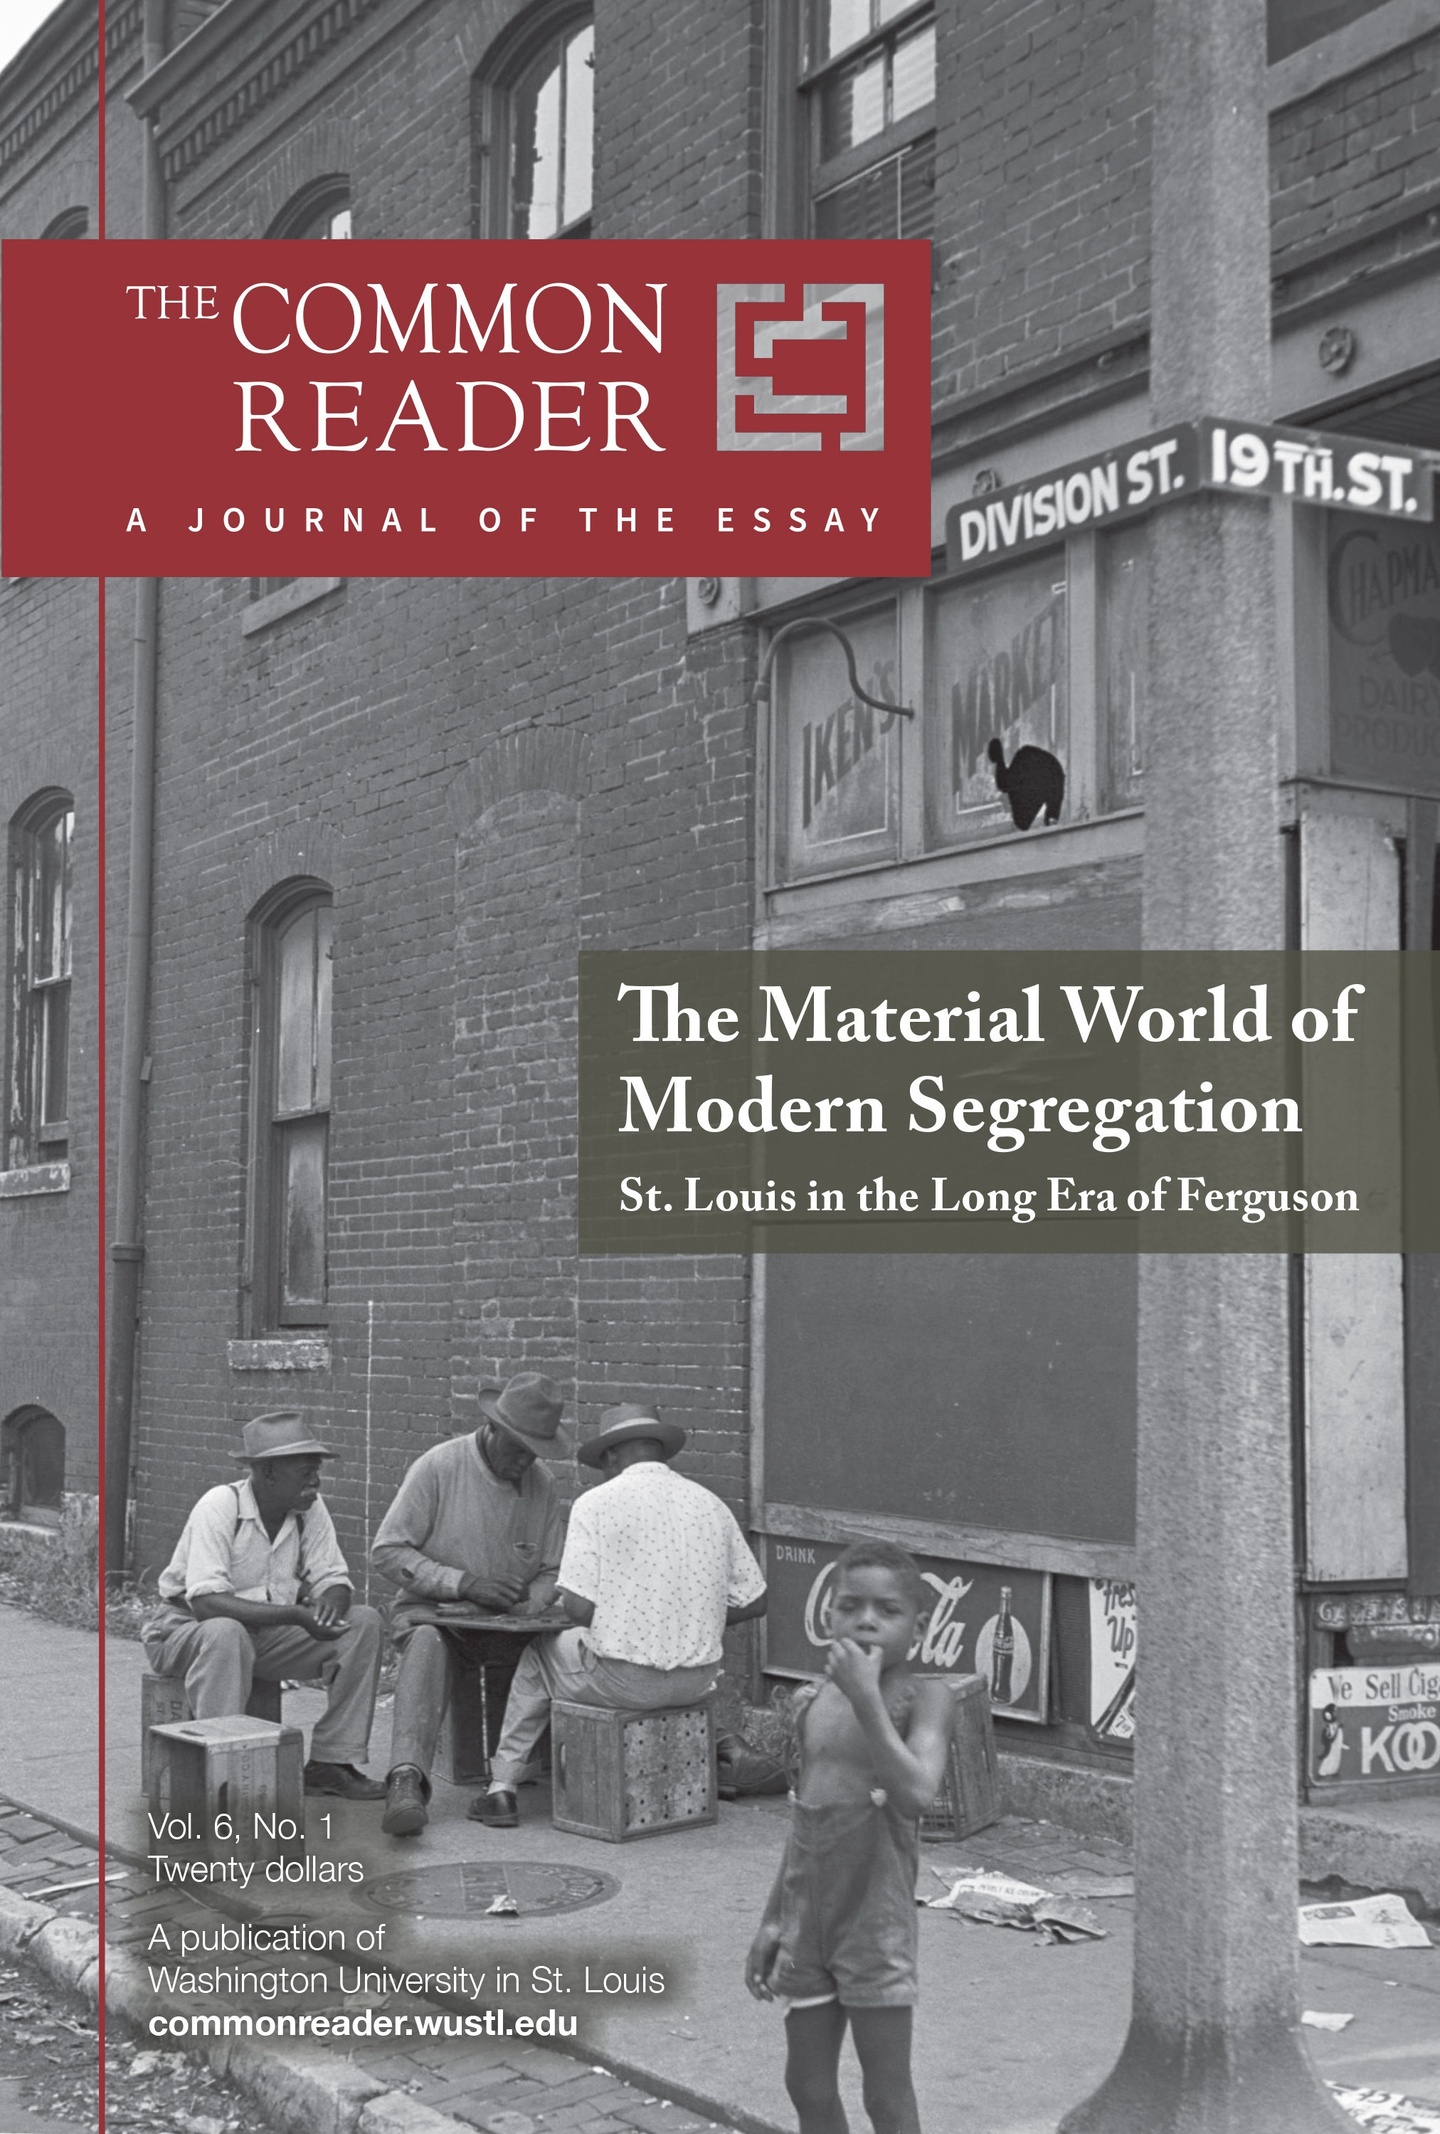 Black-and-white cover of The Material World of Modern Segregation, featuring a few people gathered on the sidewalk outside a brick building. A red text block on the top of the page identifies this as a publication of The Common Reader.